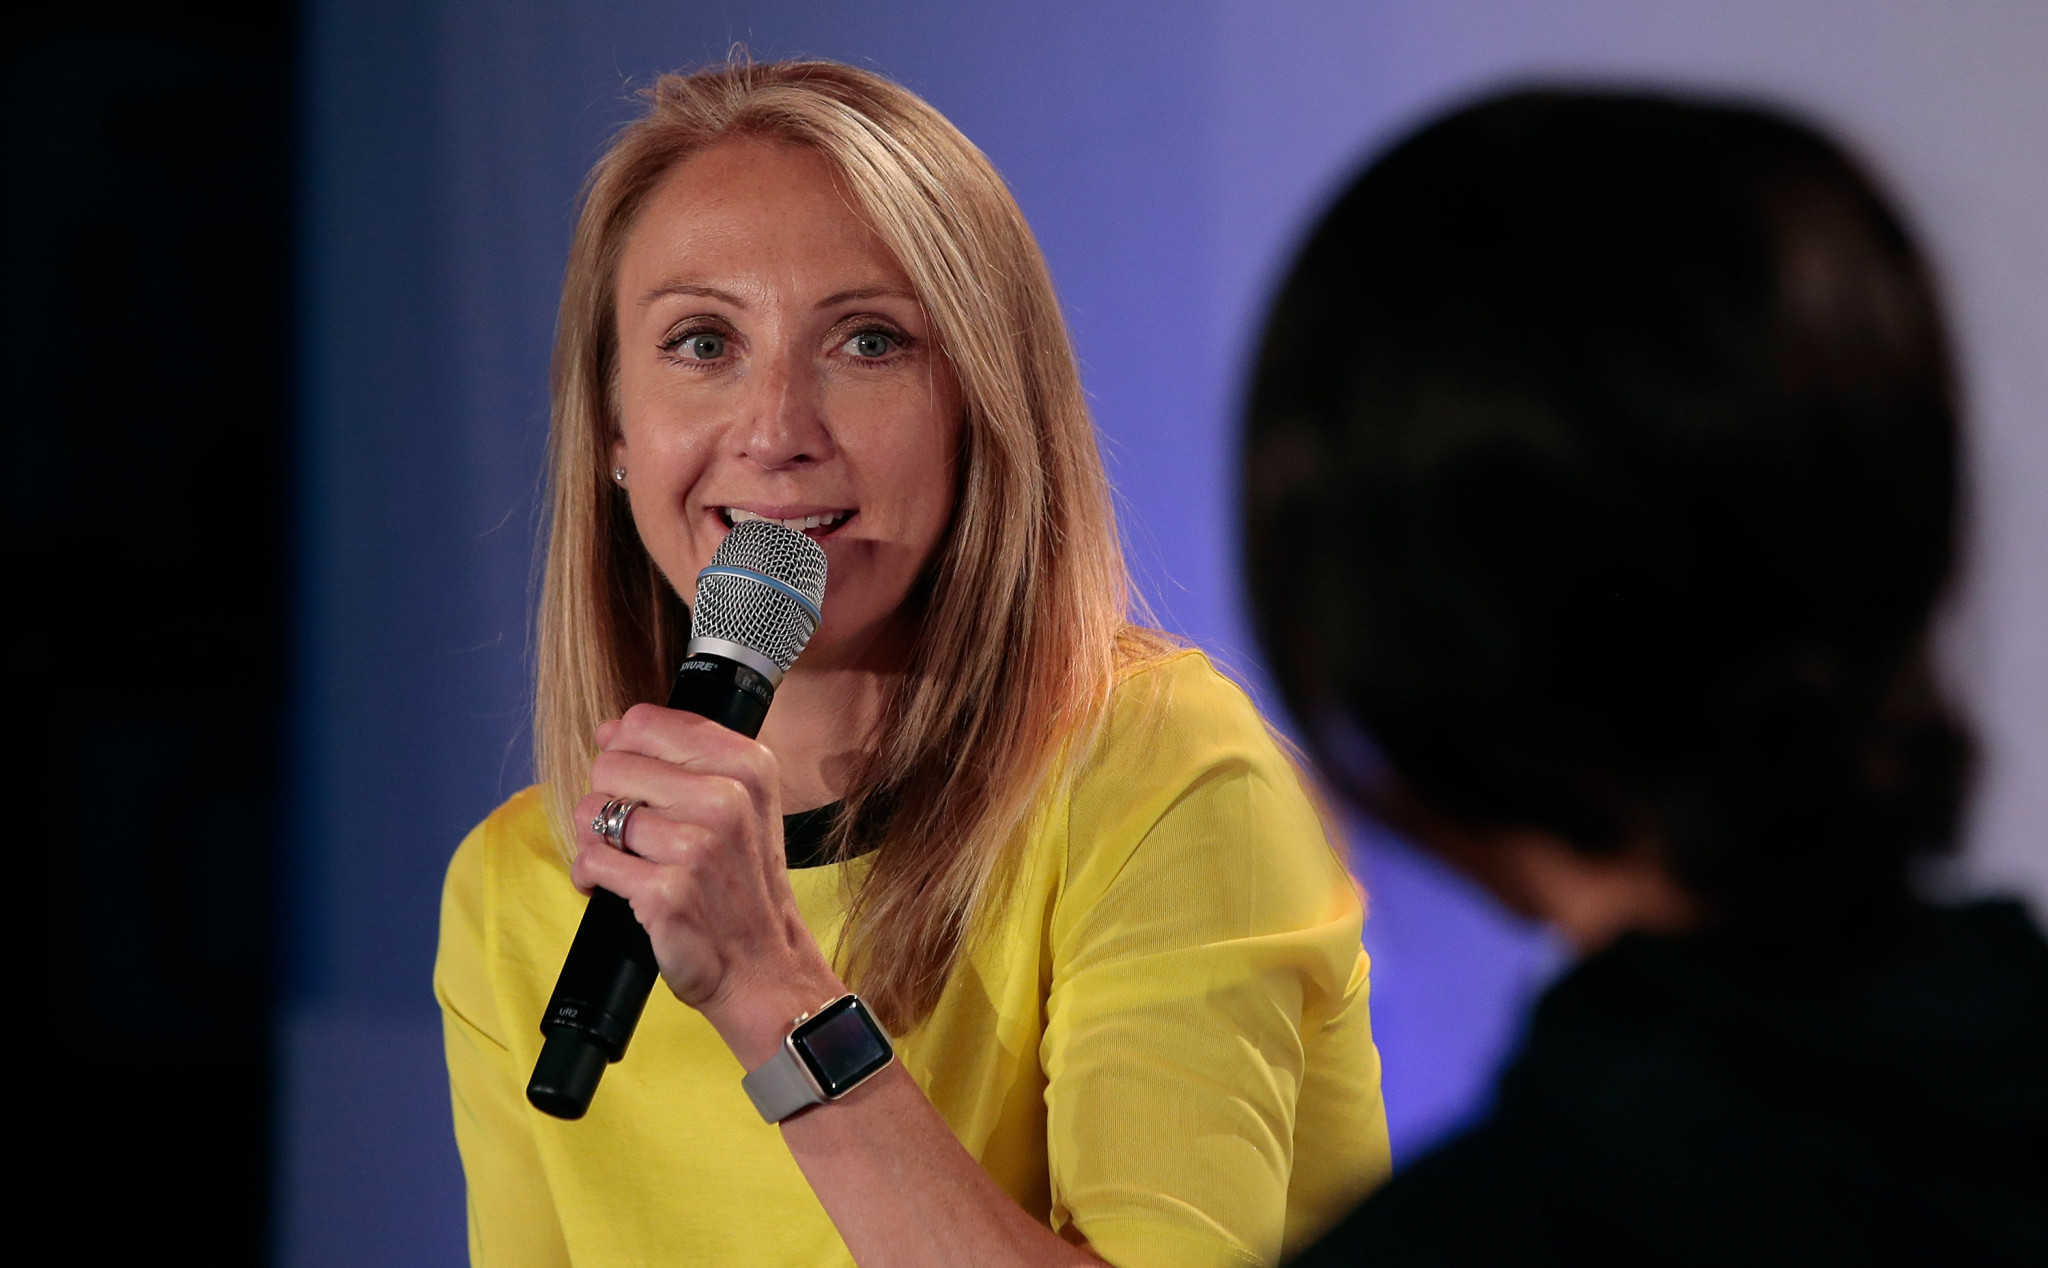 Paula Radcliffe is to feature on an IMMAF panel discussion ©Getty Images